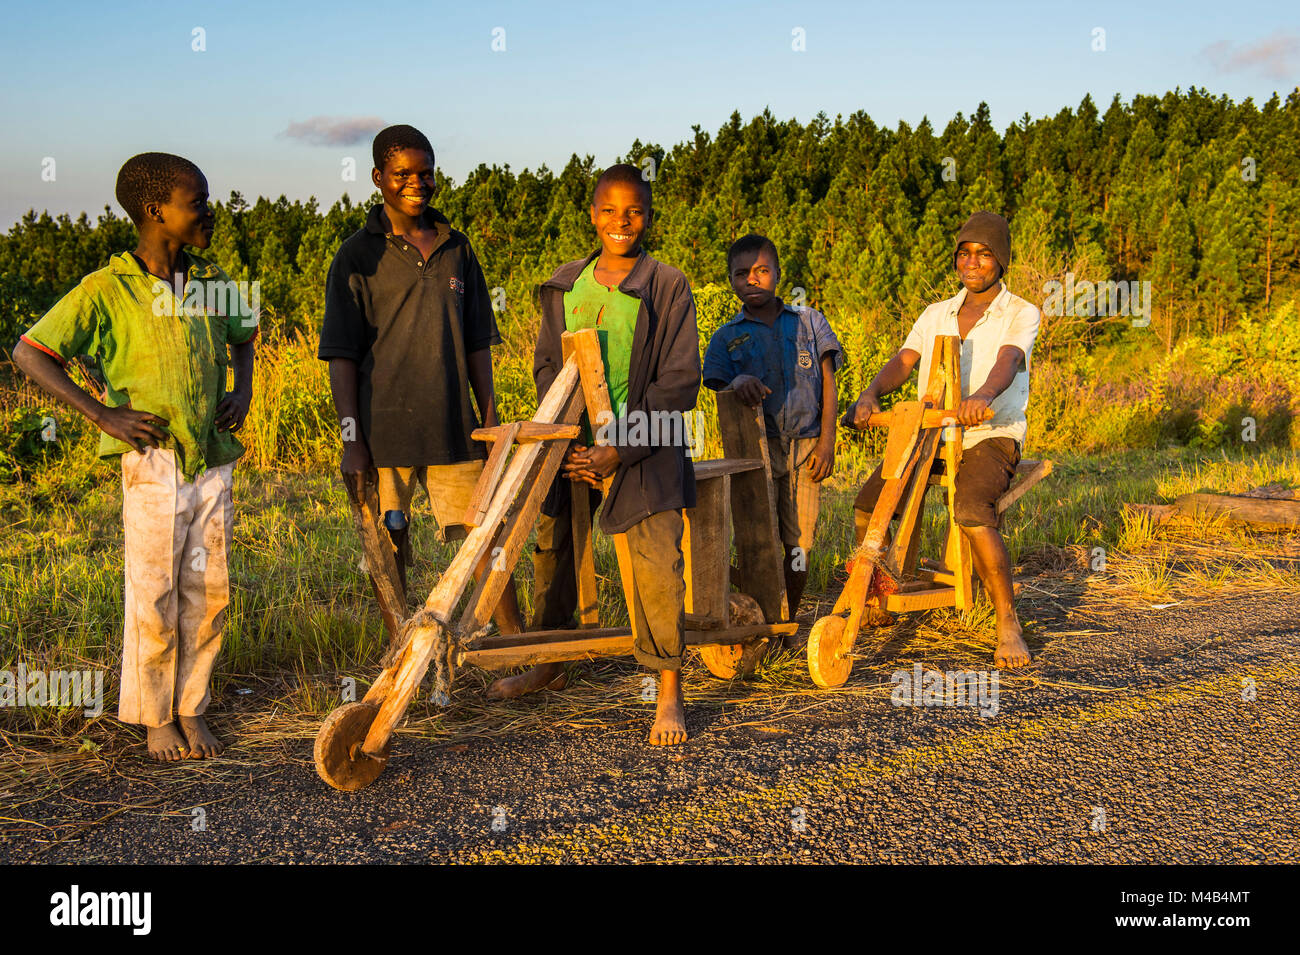 Local boys on their self made bicycles,Malawi,Africa Stock Photo